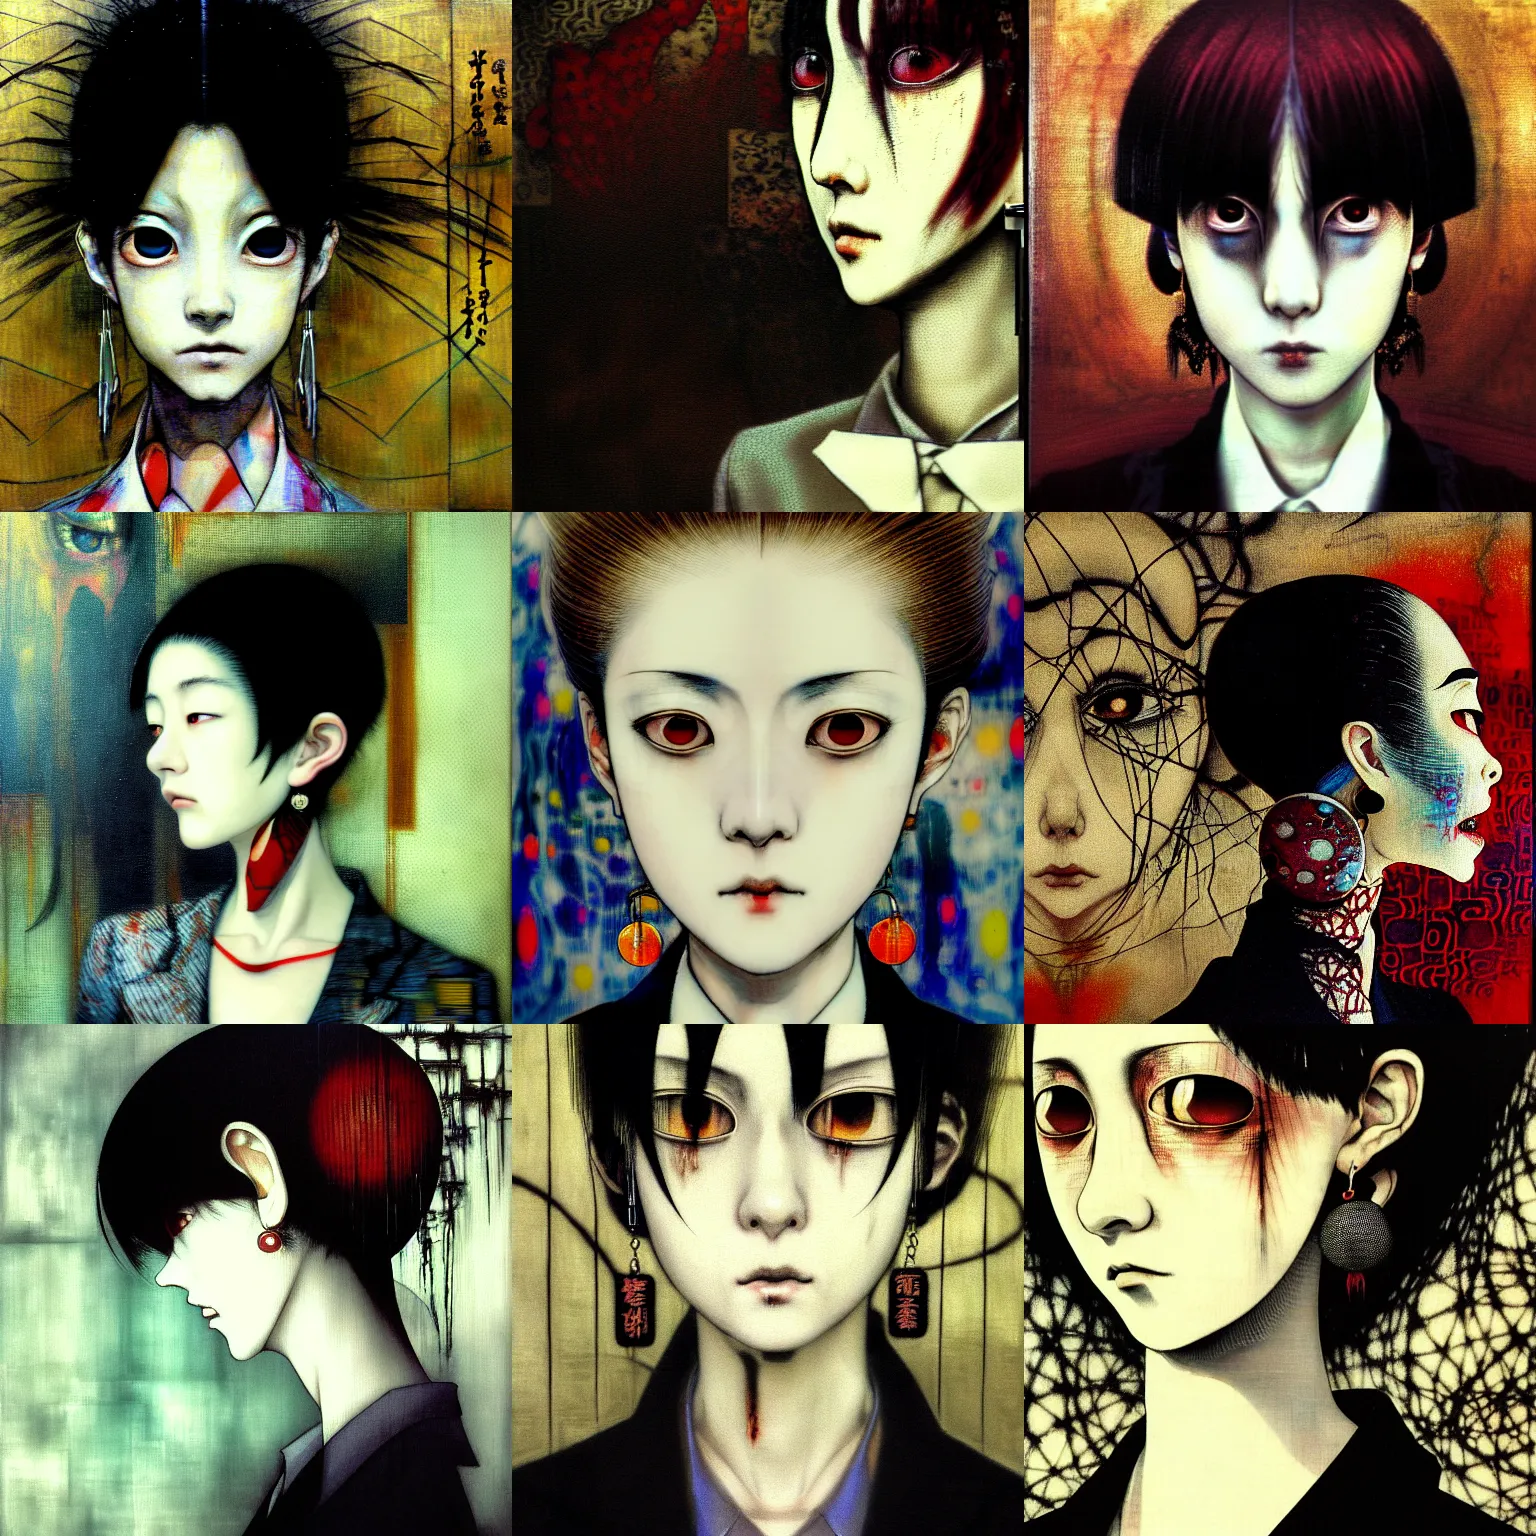 Prompt: yoshitaka amano blurred and dreamy realistic three quarter angle horror portrait of a sinister young woman with short hair, big earrings and blind eyes wearing office suit with tie, junji ito abstract patterns in the background, satoshi kon anime, noisy film grain effect, highly detailed, renaissance oil painting, weird portrait angle, blurred lost edges